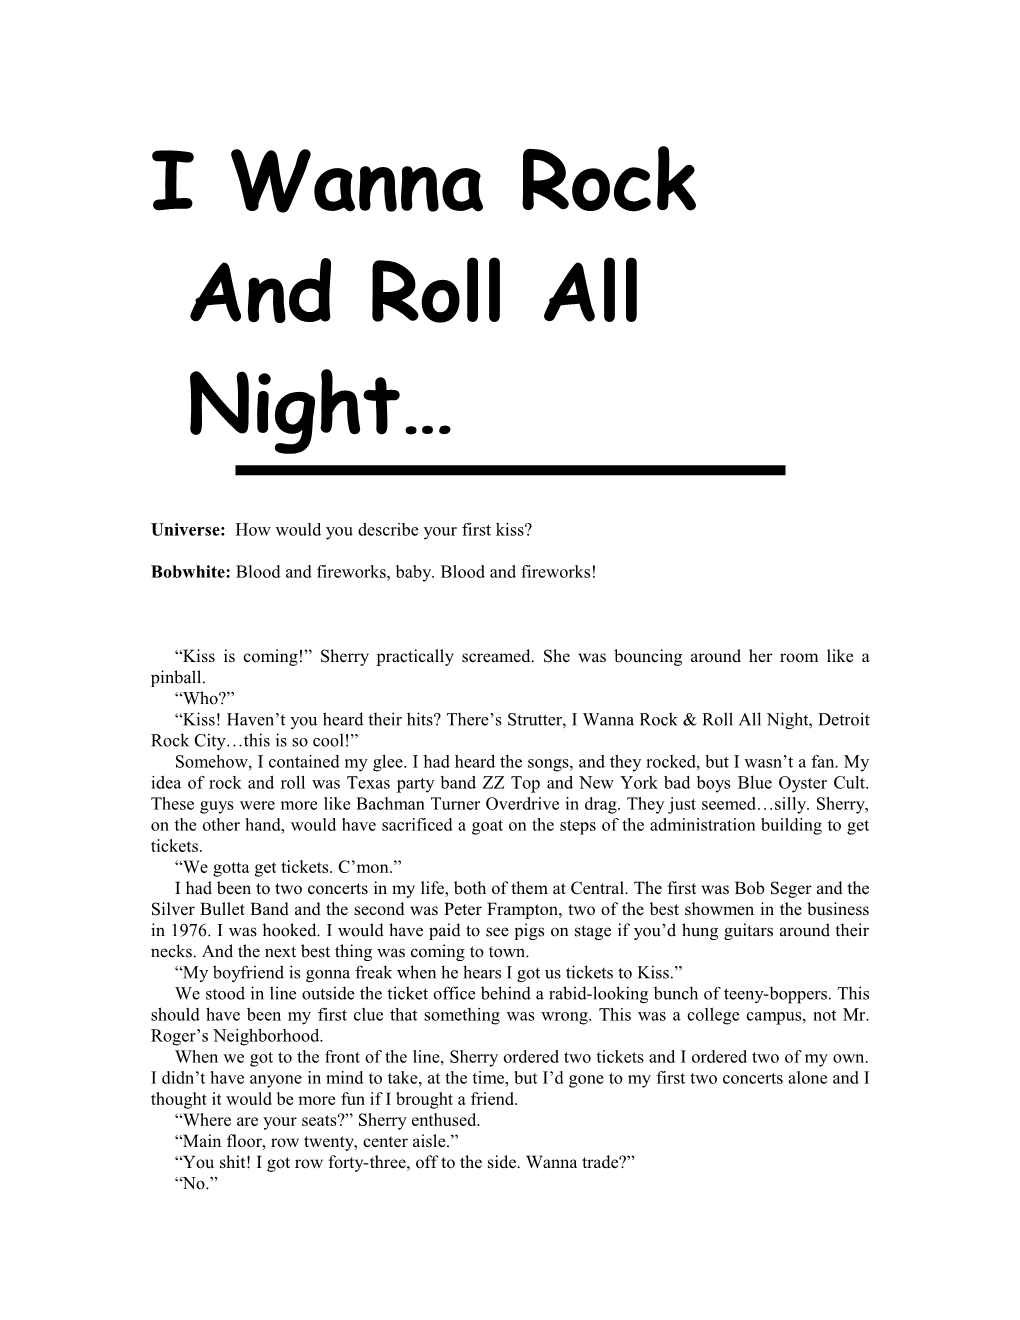 I Wanna Rock and Roll All Night